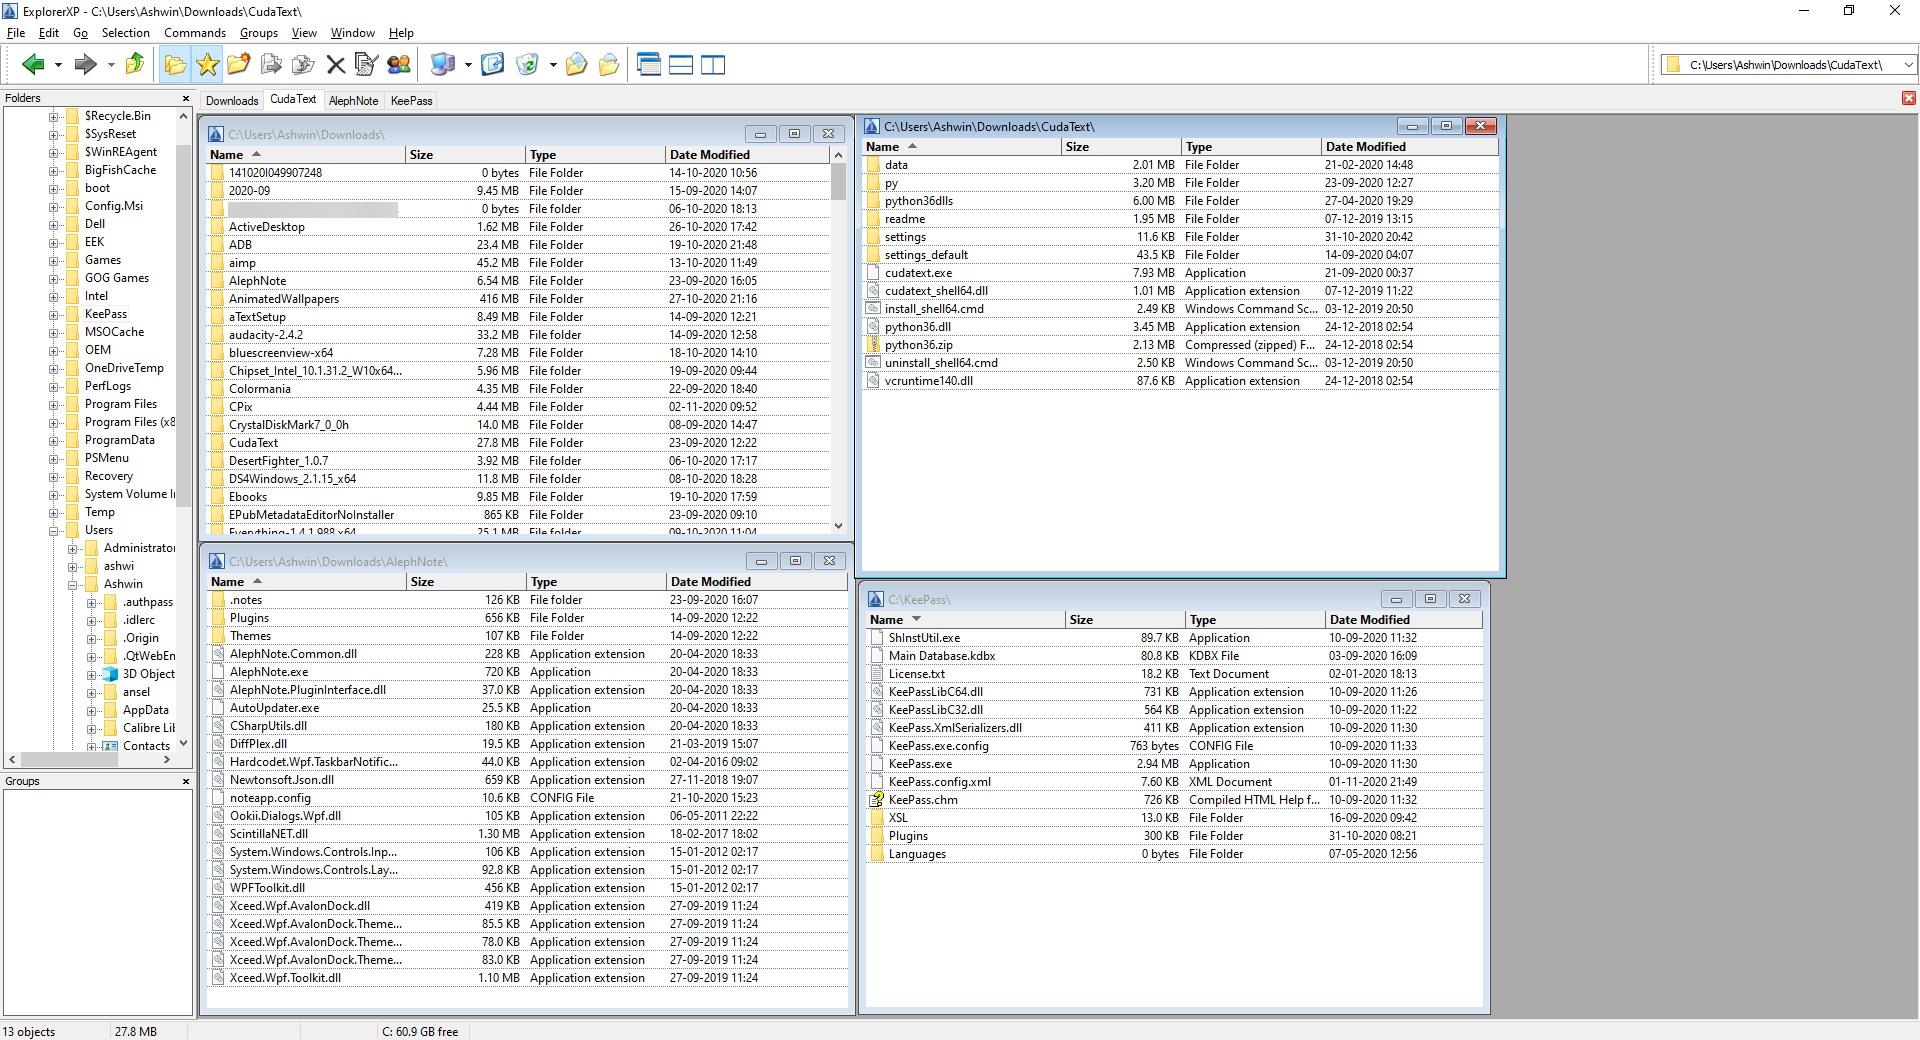 ExplorerXP is a freeware tabbed file manager for Windows